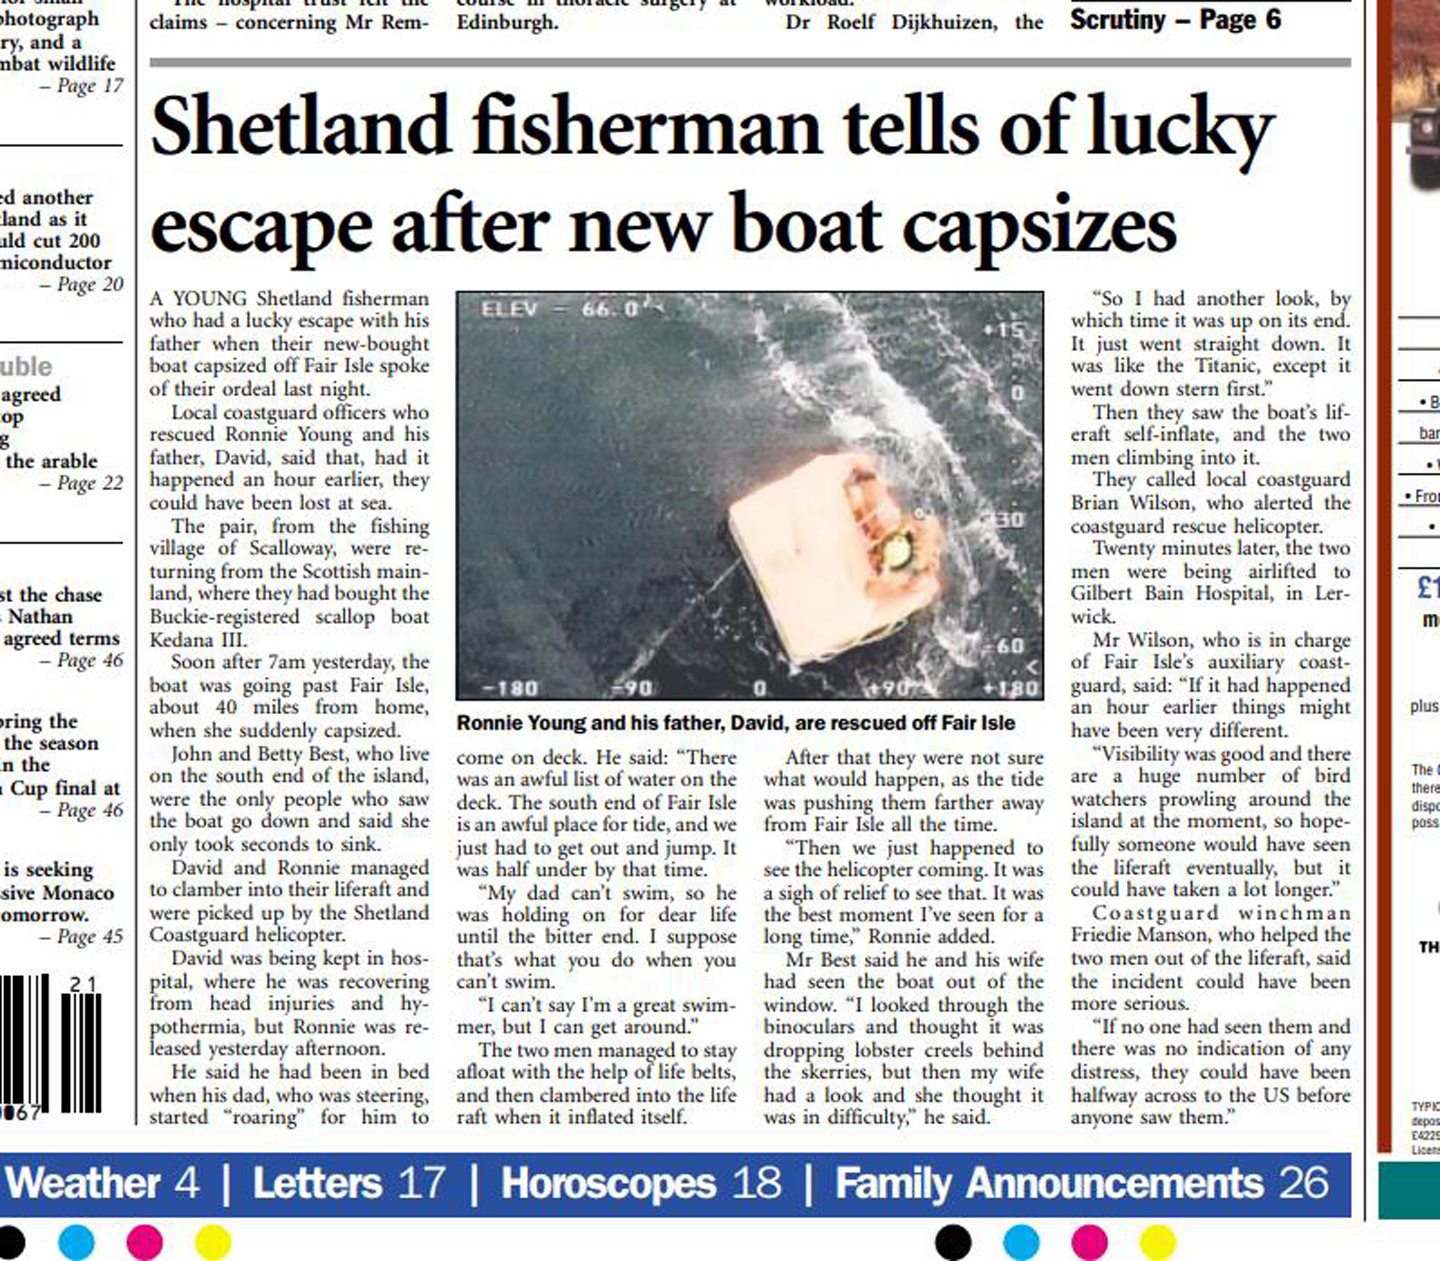 Article about Ronnie Young and Davy Young. Shetland